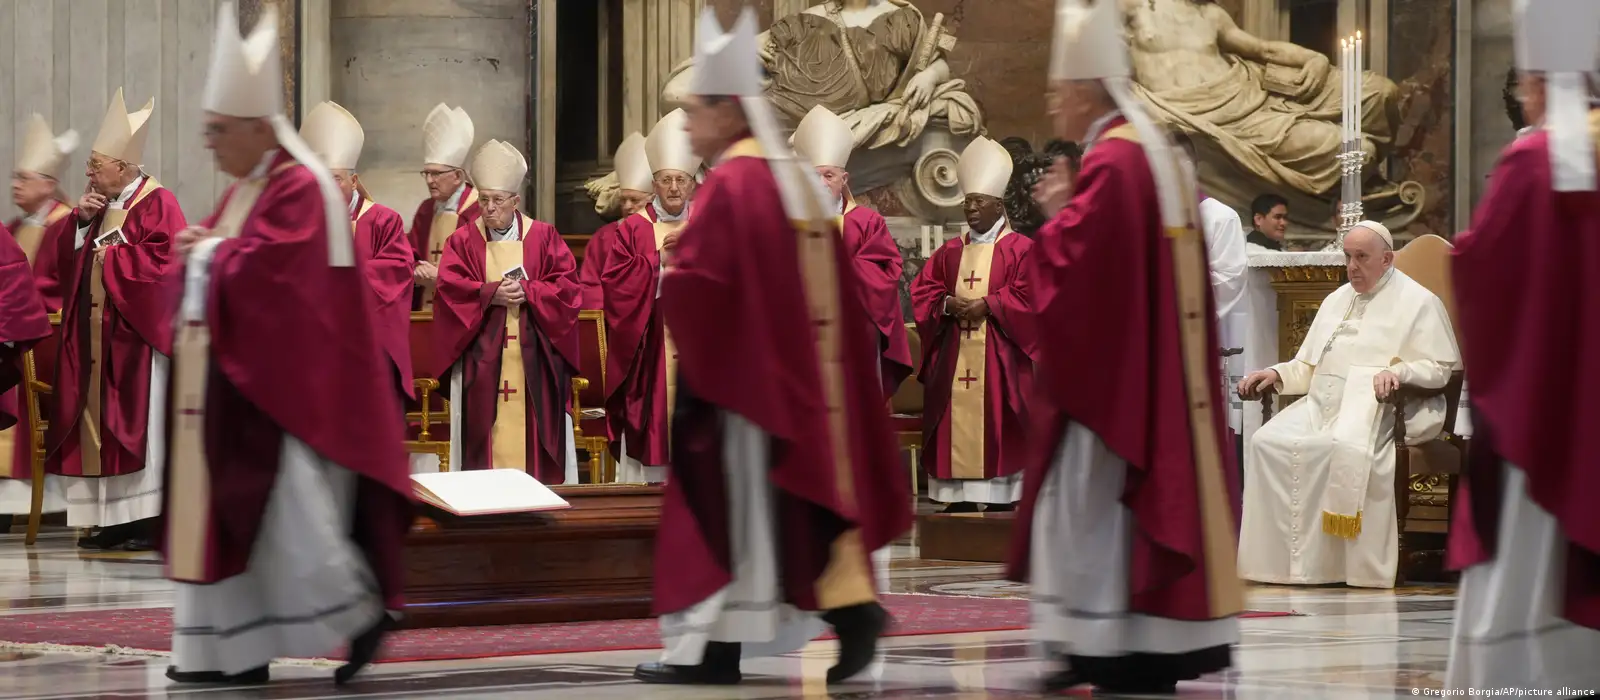 Pope orders salary cuts for cardinals and clerics to save jobs of employees